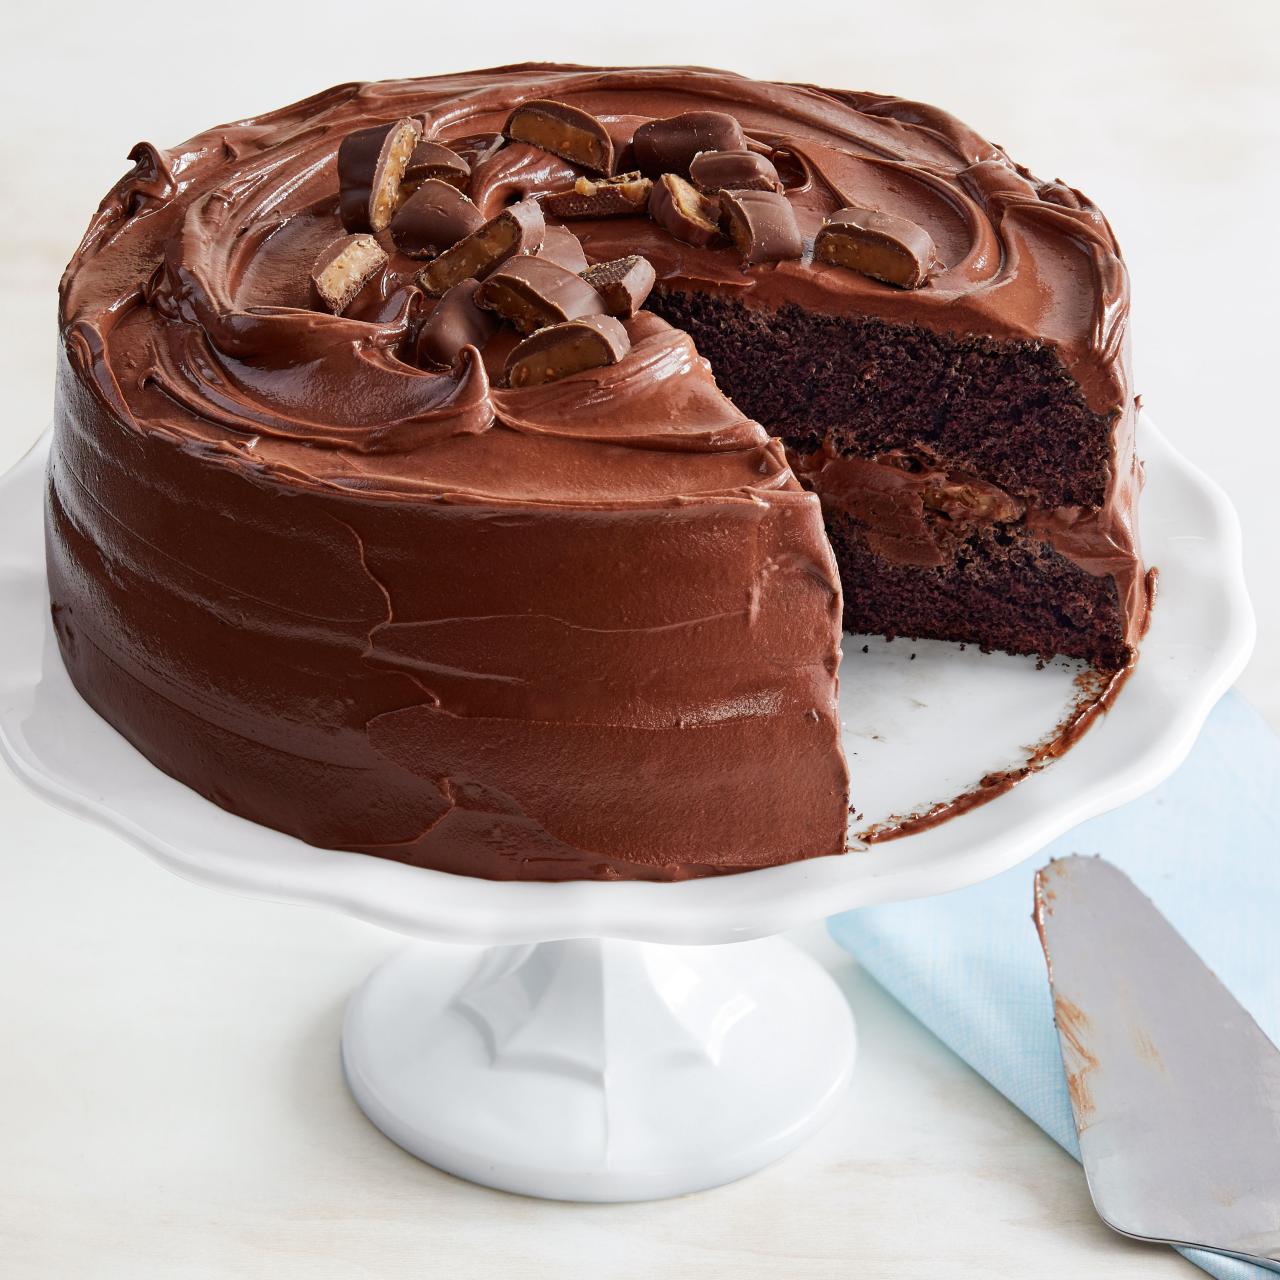 Order Delightful Chocolate Cake 1 Kg Online at Best Price, Free  Delivery|IGP Cakes